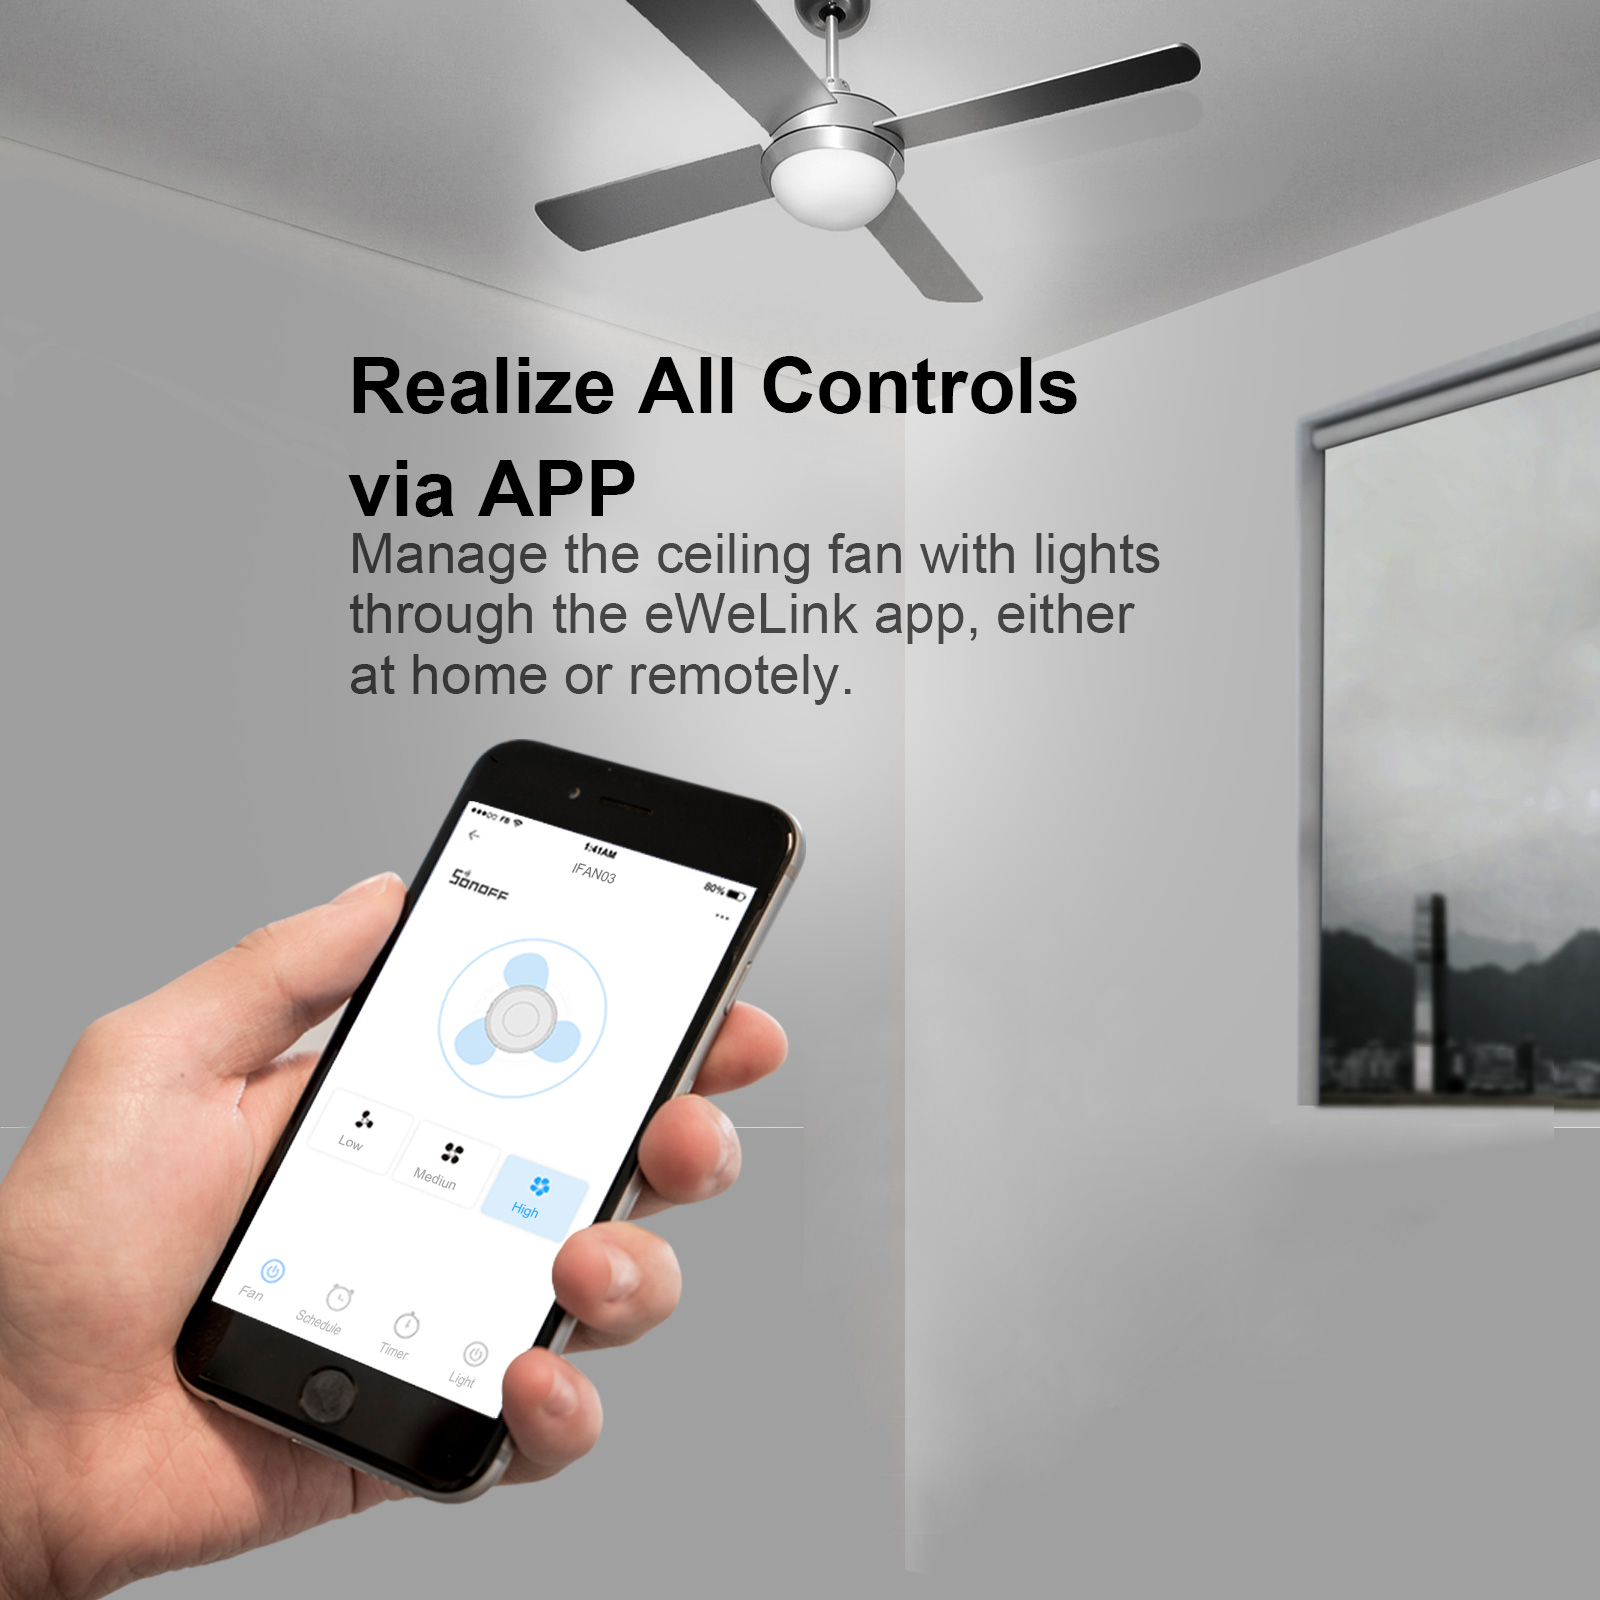 SONOFF iFan04-L WiFi Ceiling Fan Light Controller, APP Control& Remote Control, Compatible with Alexa & Google Home Assistant (Remote control not included) - image 3 of 11